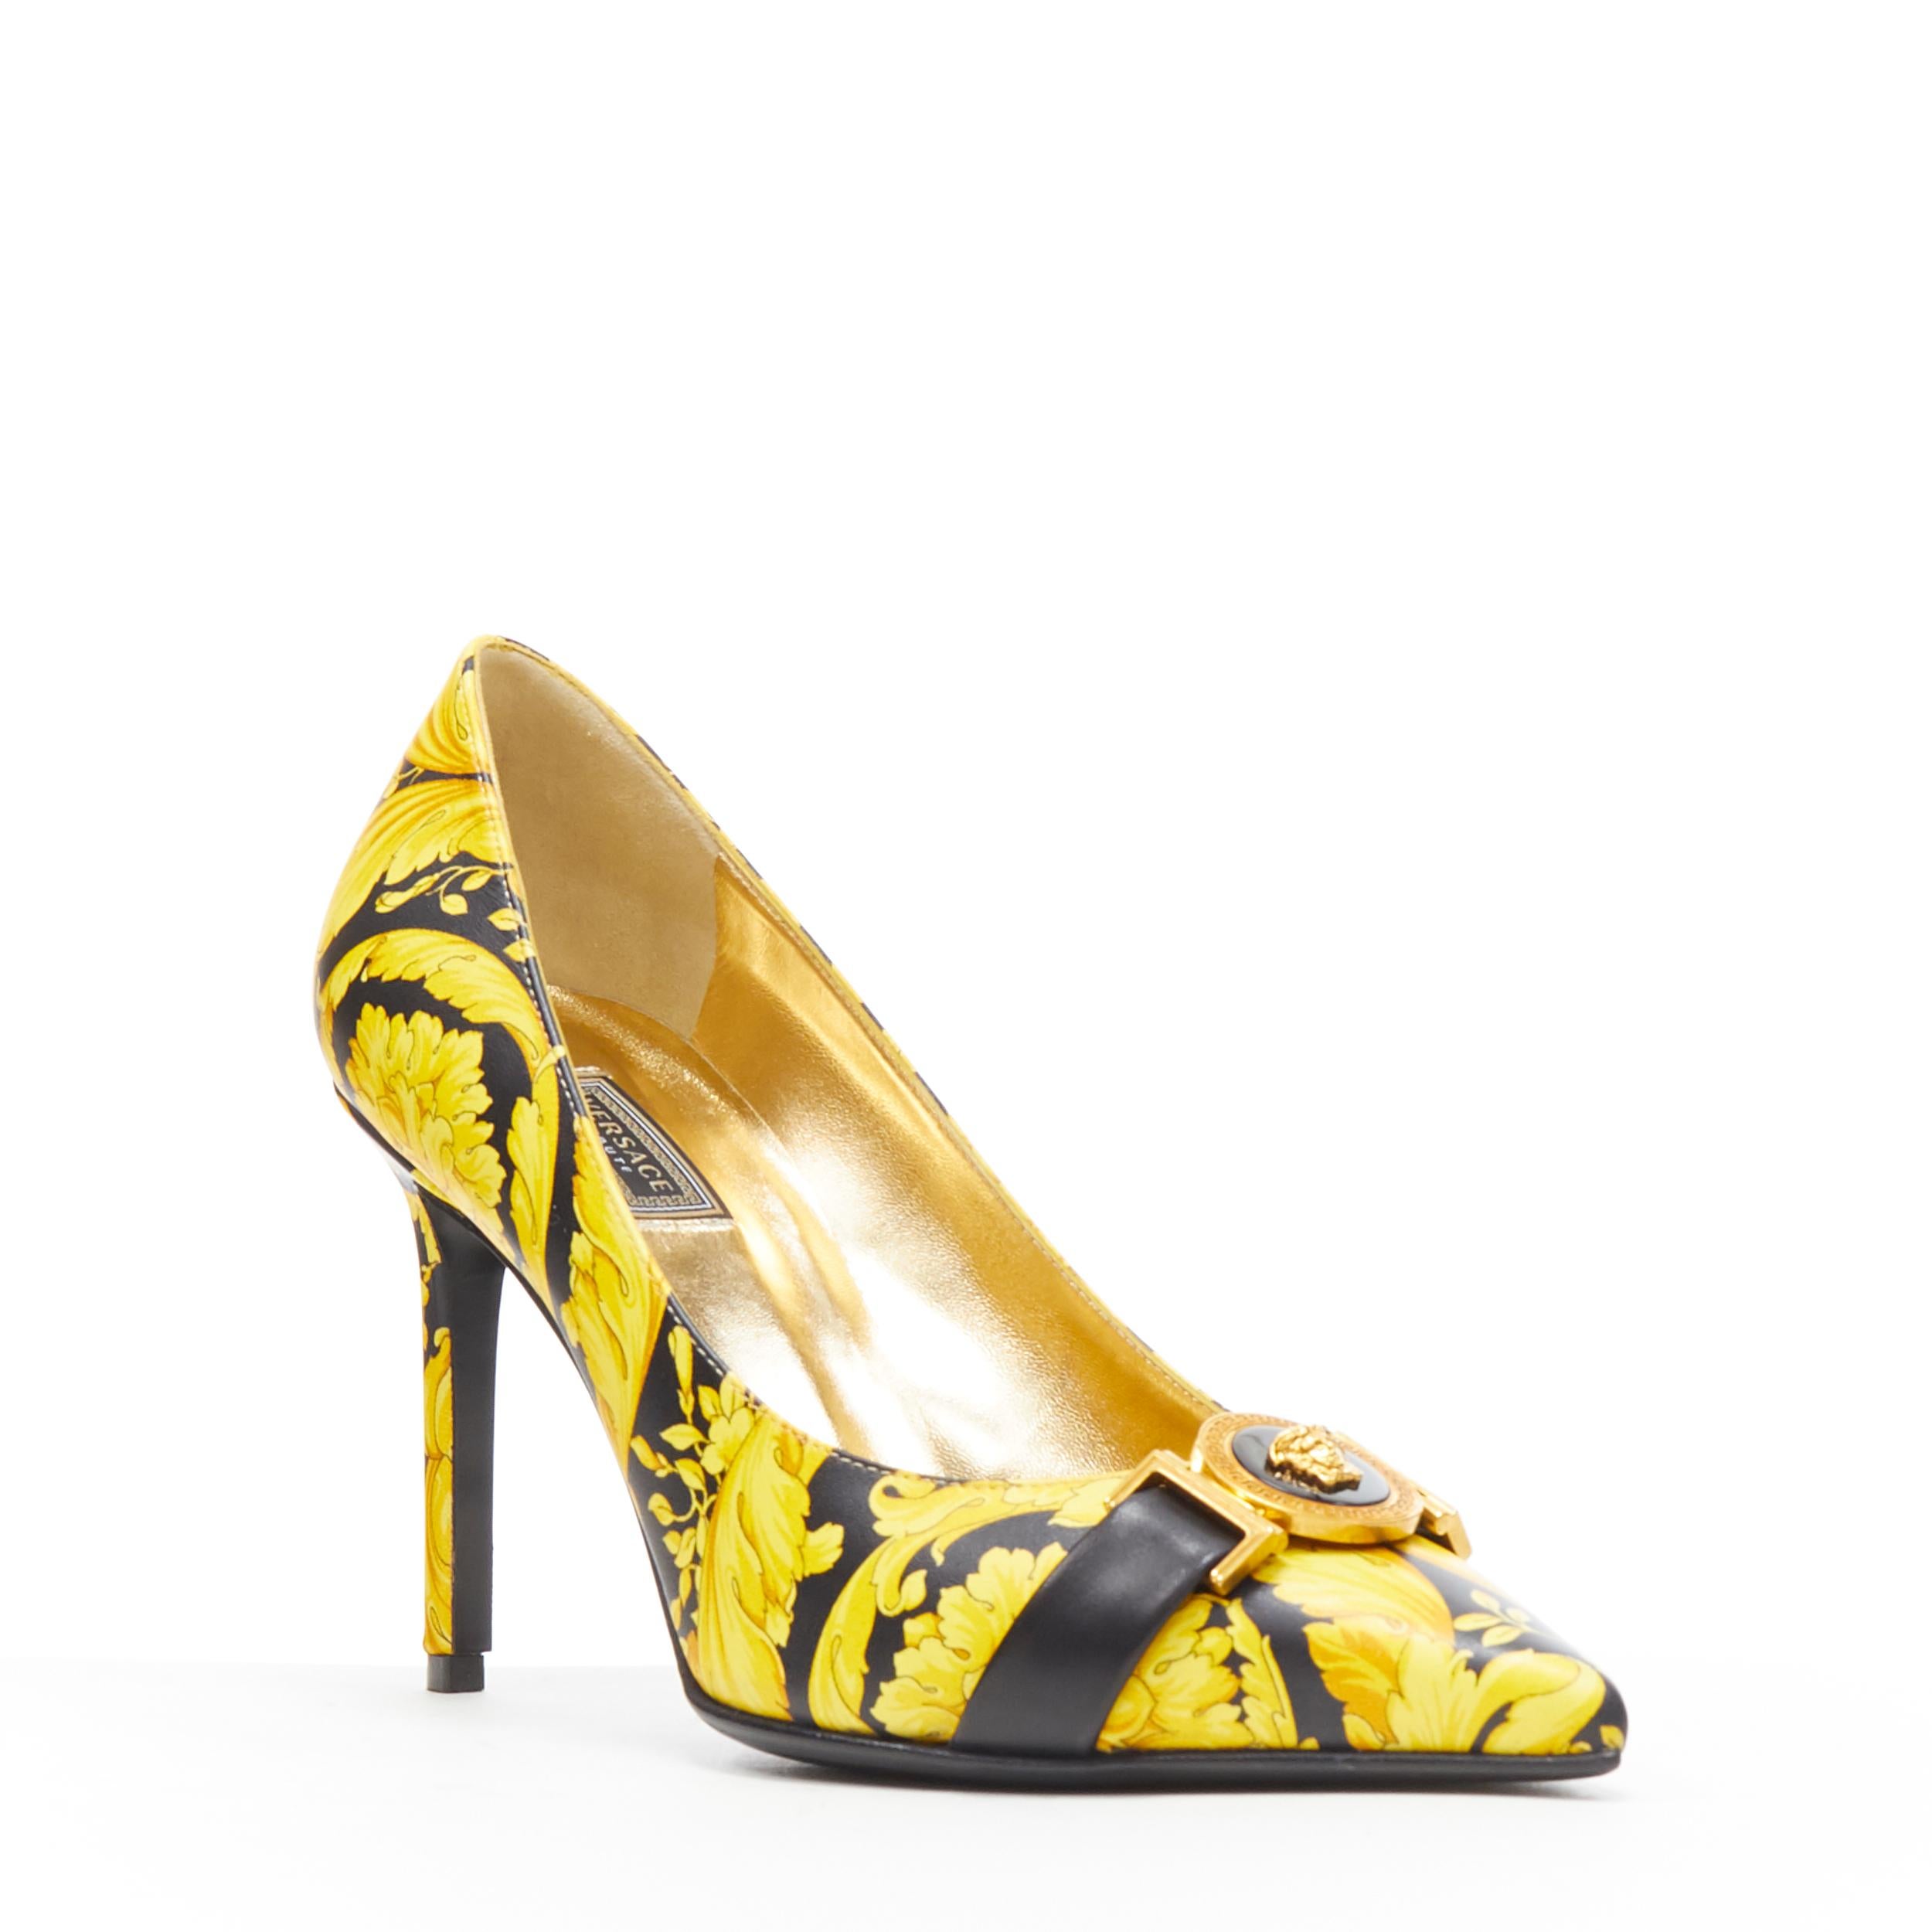 new VERSACE Tribute Baroque 1992 Hibiscus barocco Medusa strap leather heel EU39
Brand: Versace
Designer: Donatella Versace
Collection: Spring Summer 2018
Model Name / Style: Baroque pump
Material: Leather
Color: Gold, black
Pattern: Floral
Extra